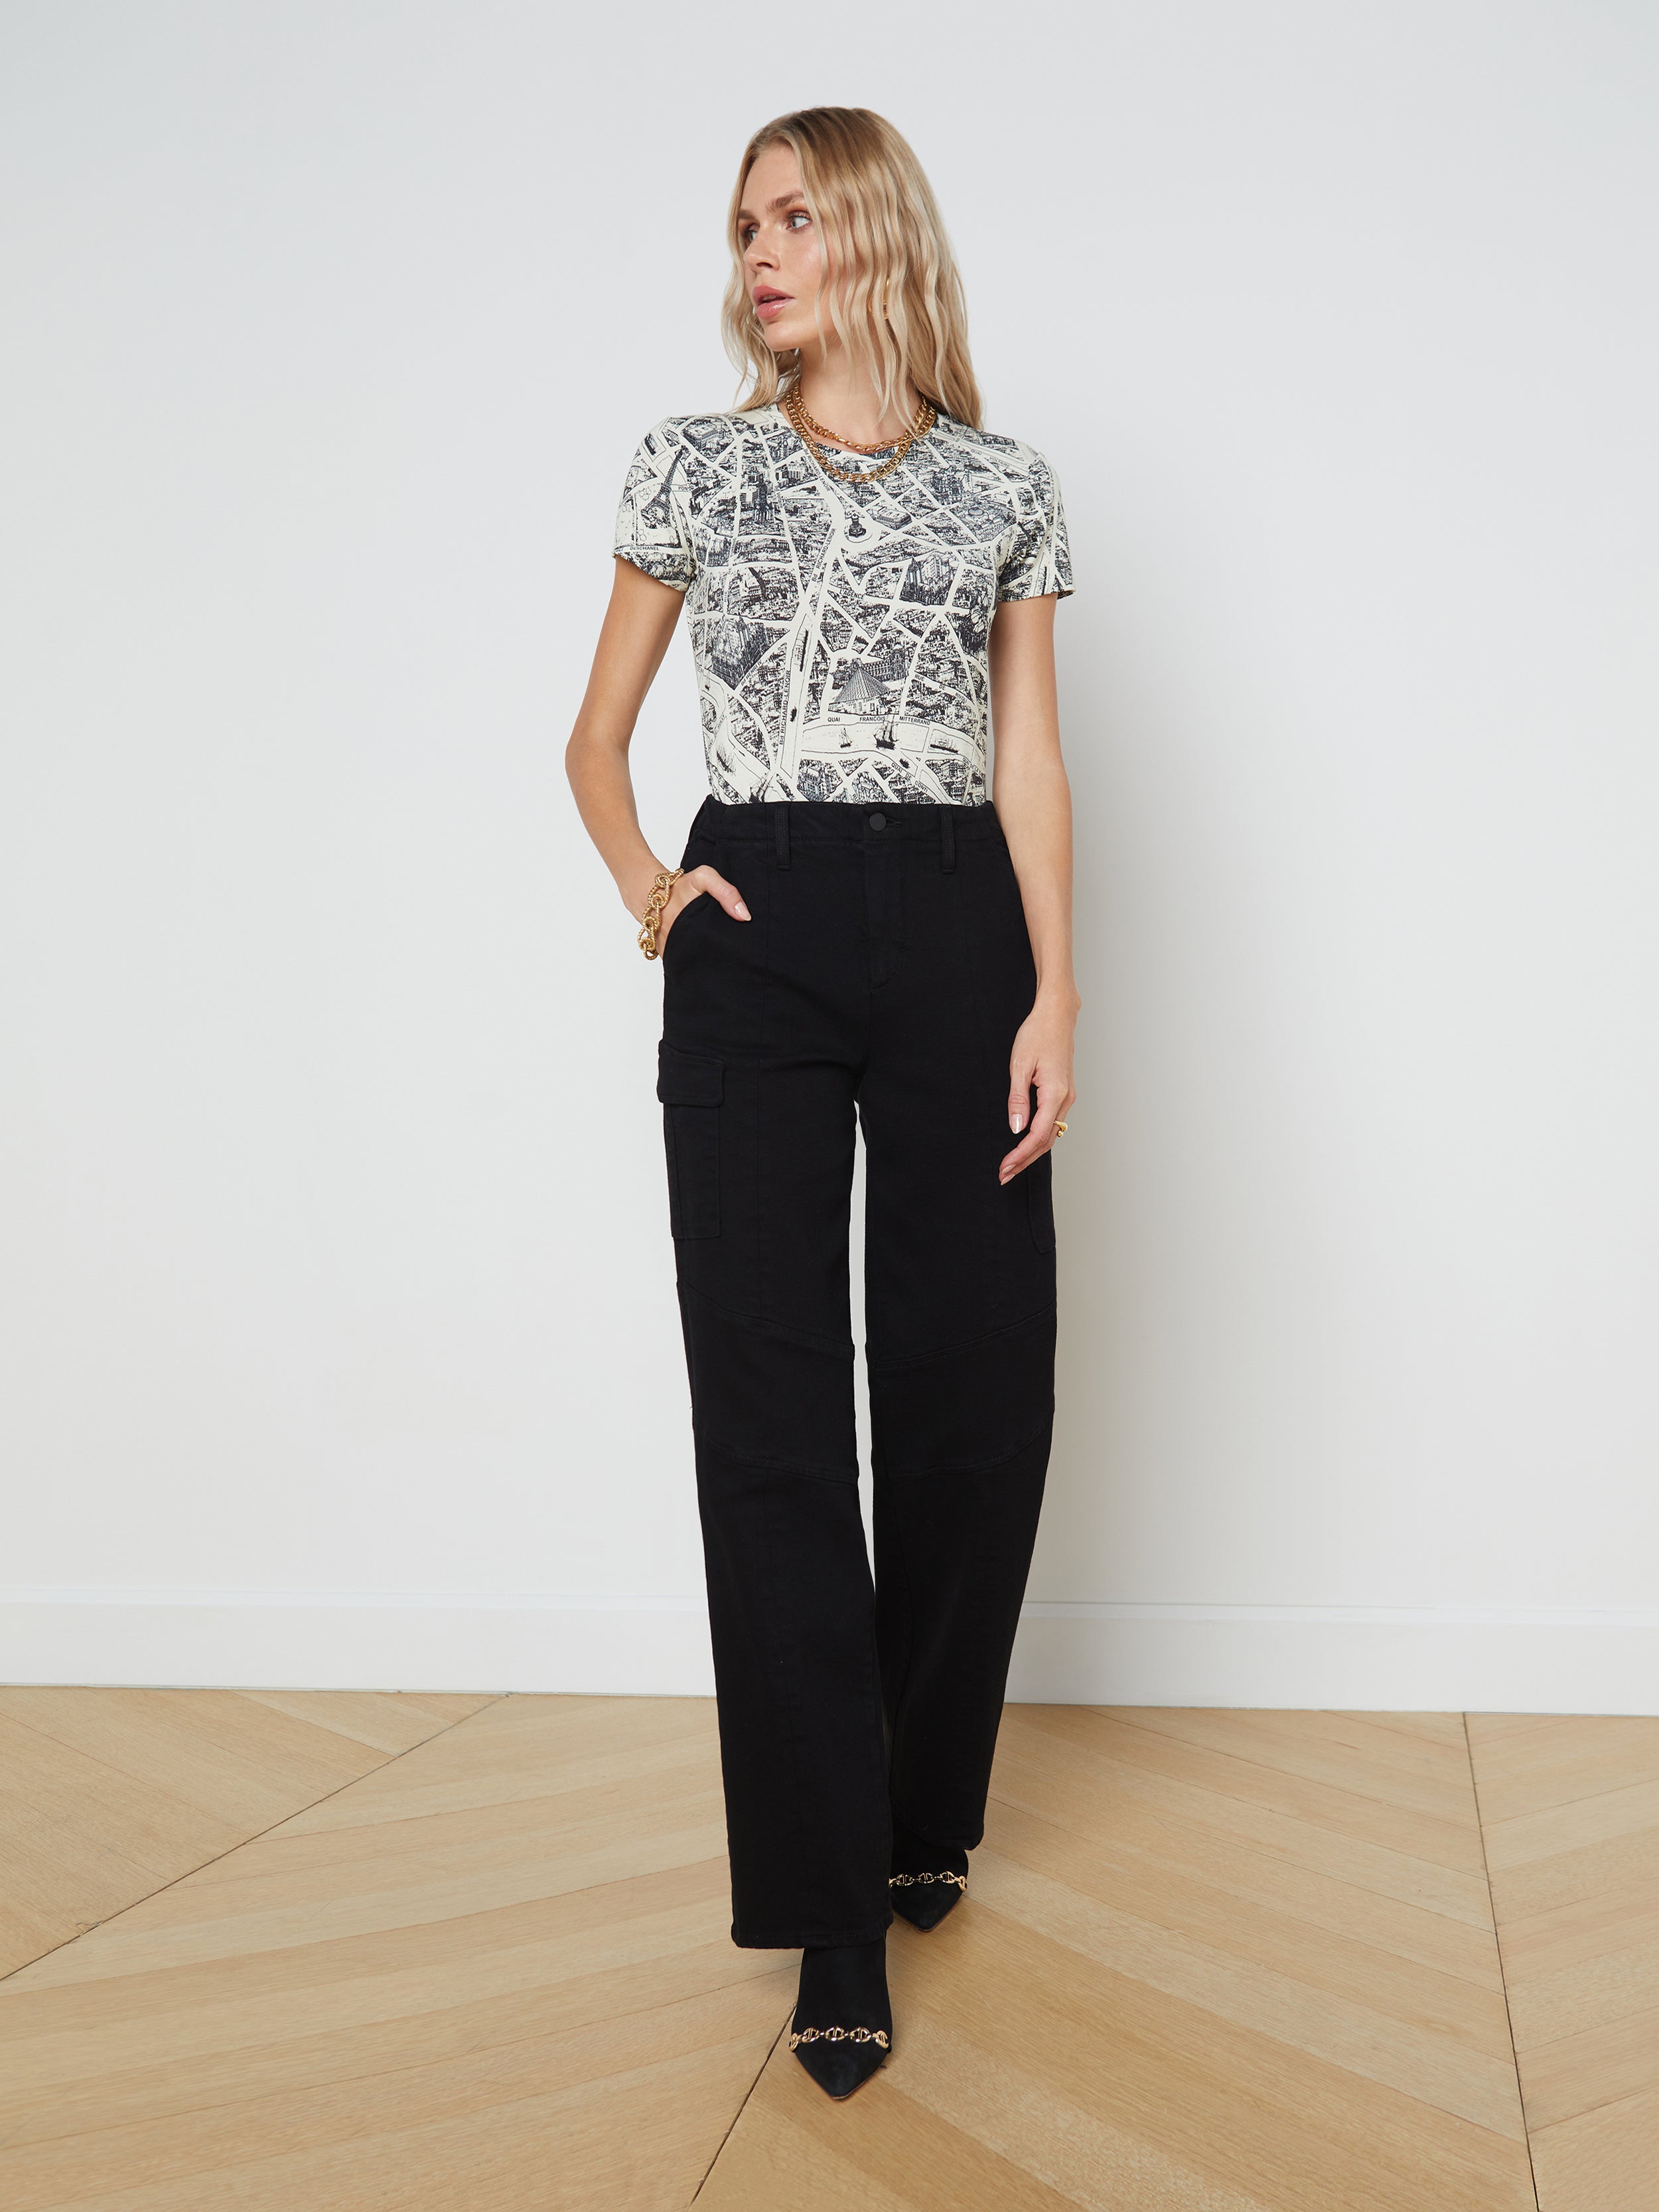 5 Casual Friday Office Outfits Ft. Dark Denim Trousers - The Mom Edit